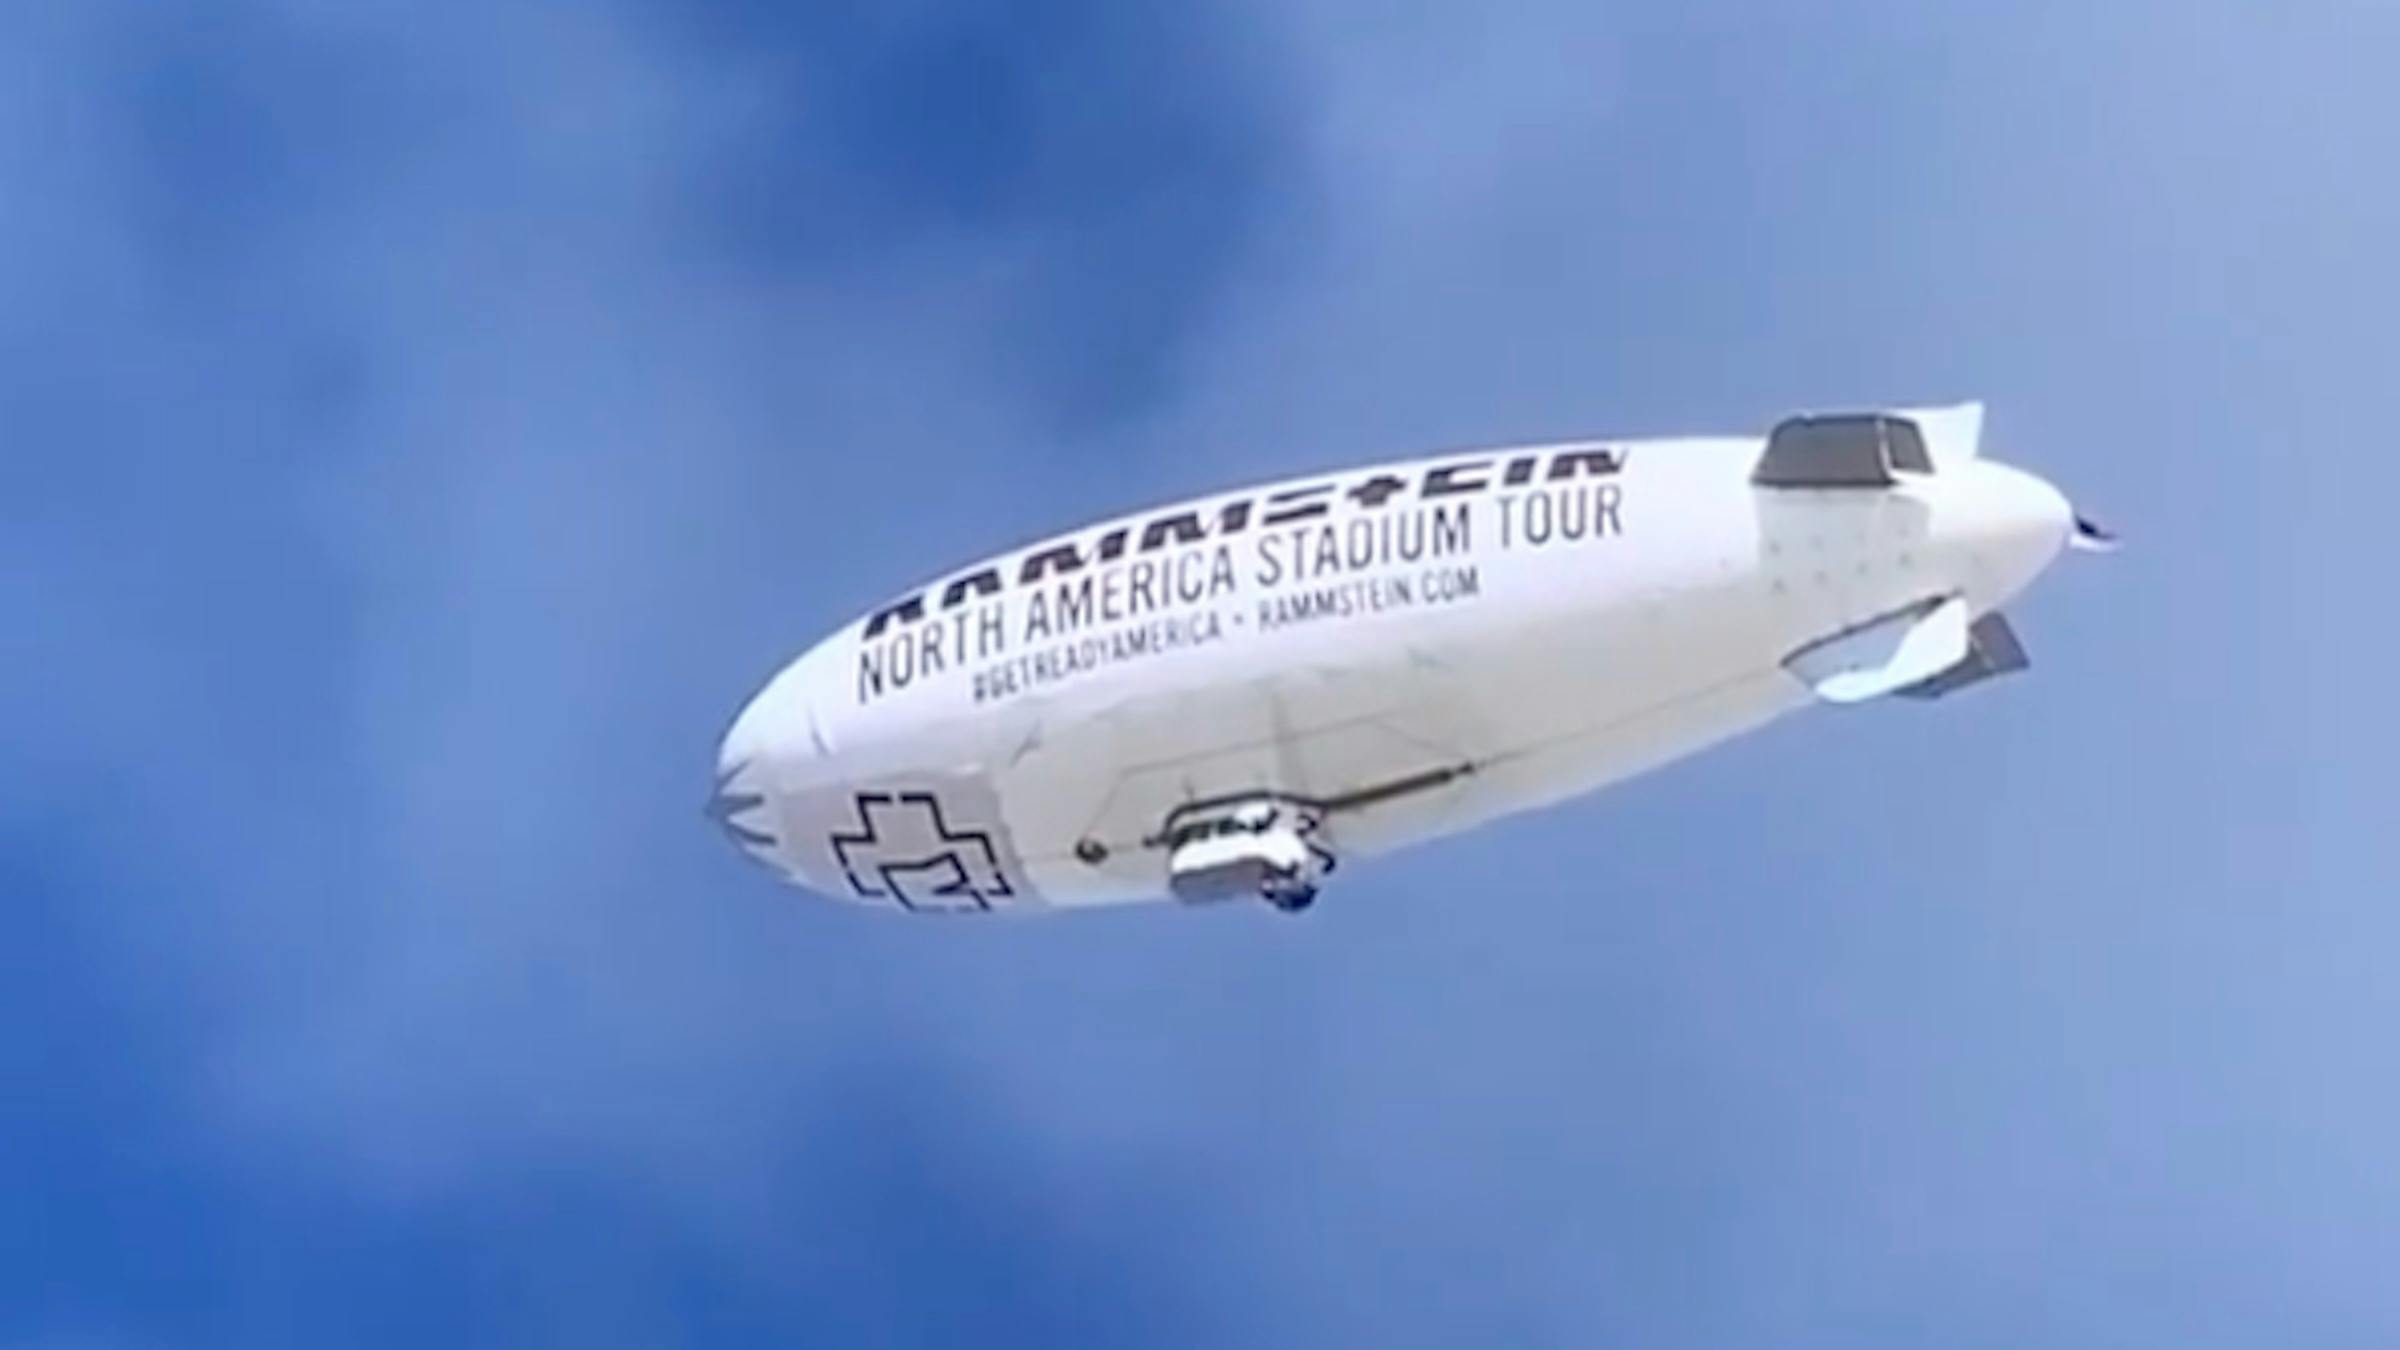 A Rammstein Blimp Is Flying Over Los Angeles